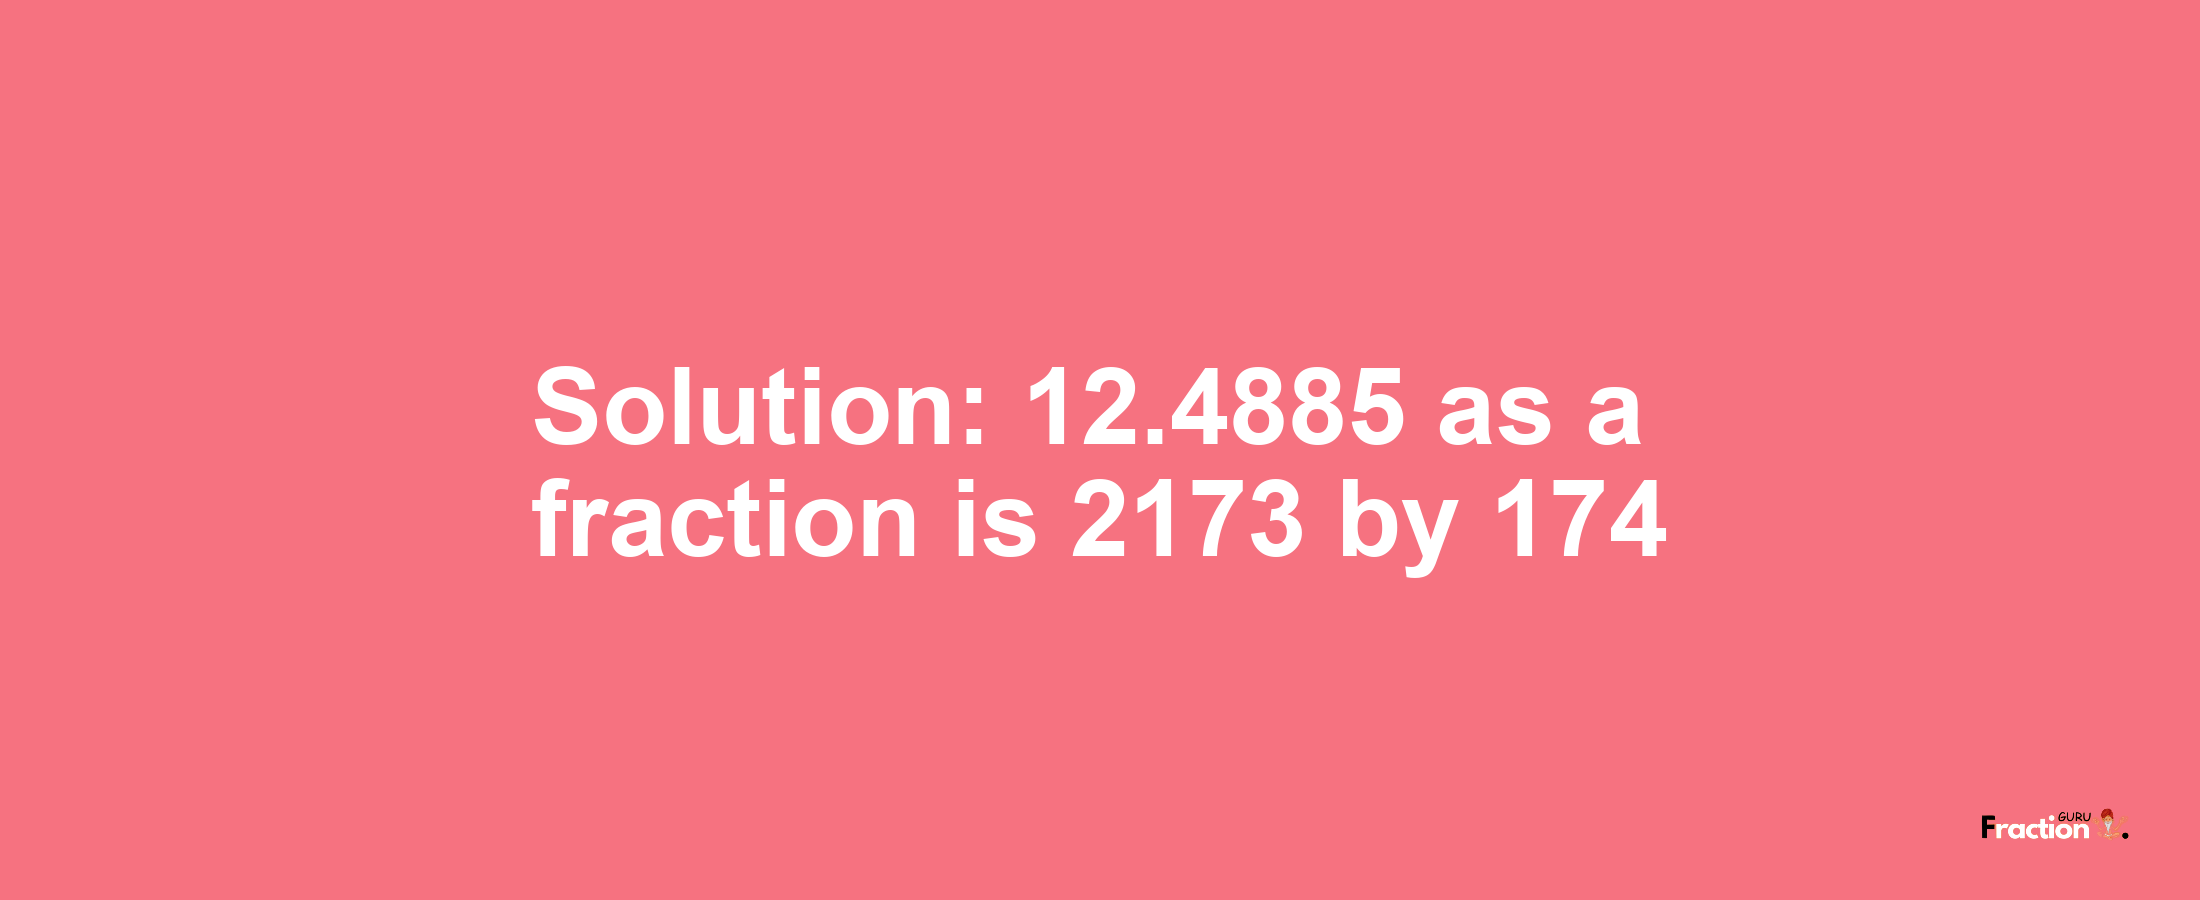 Solution:12.4885 as a fraction is 2173/174